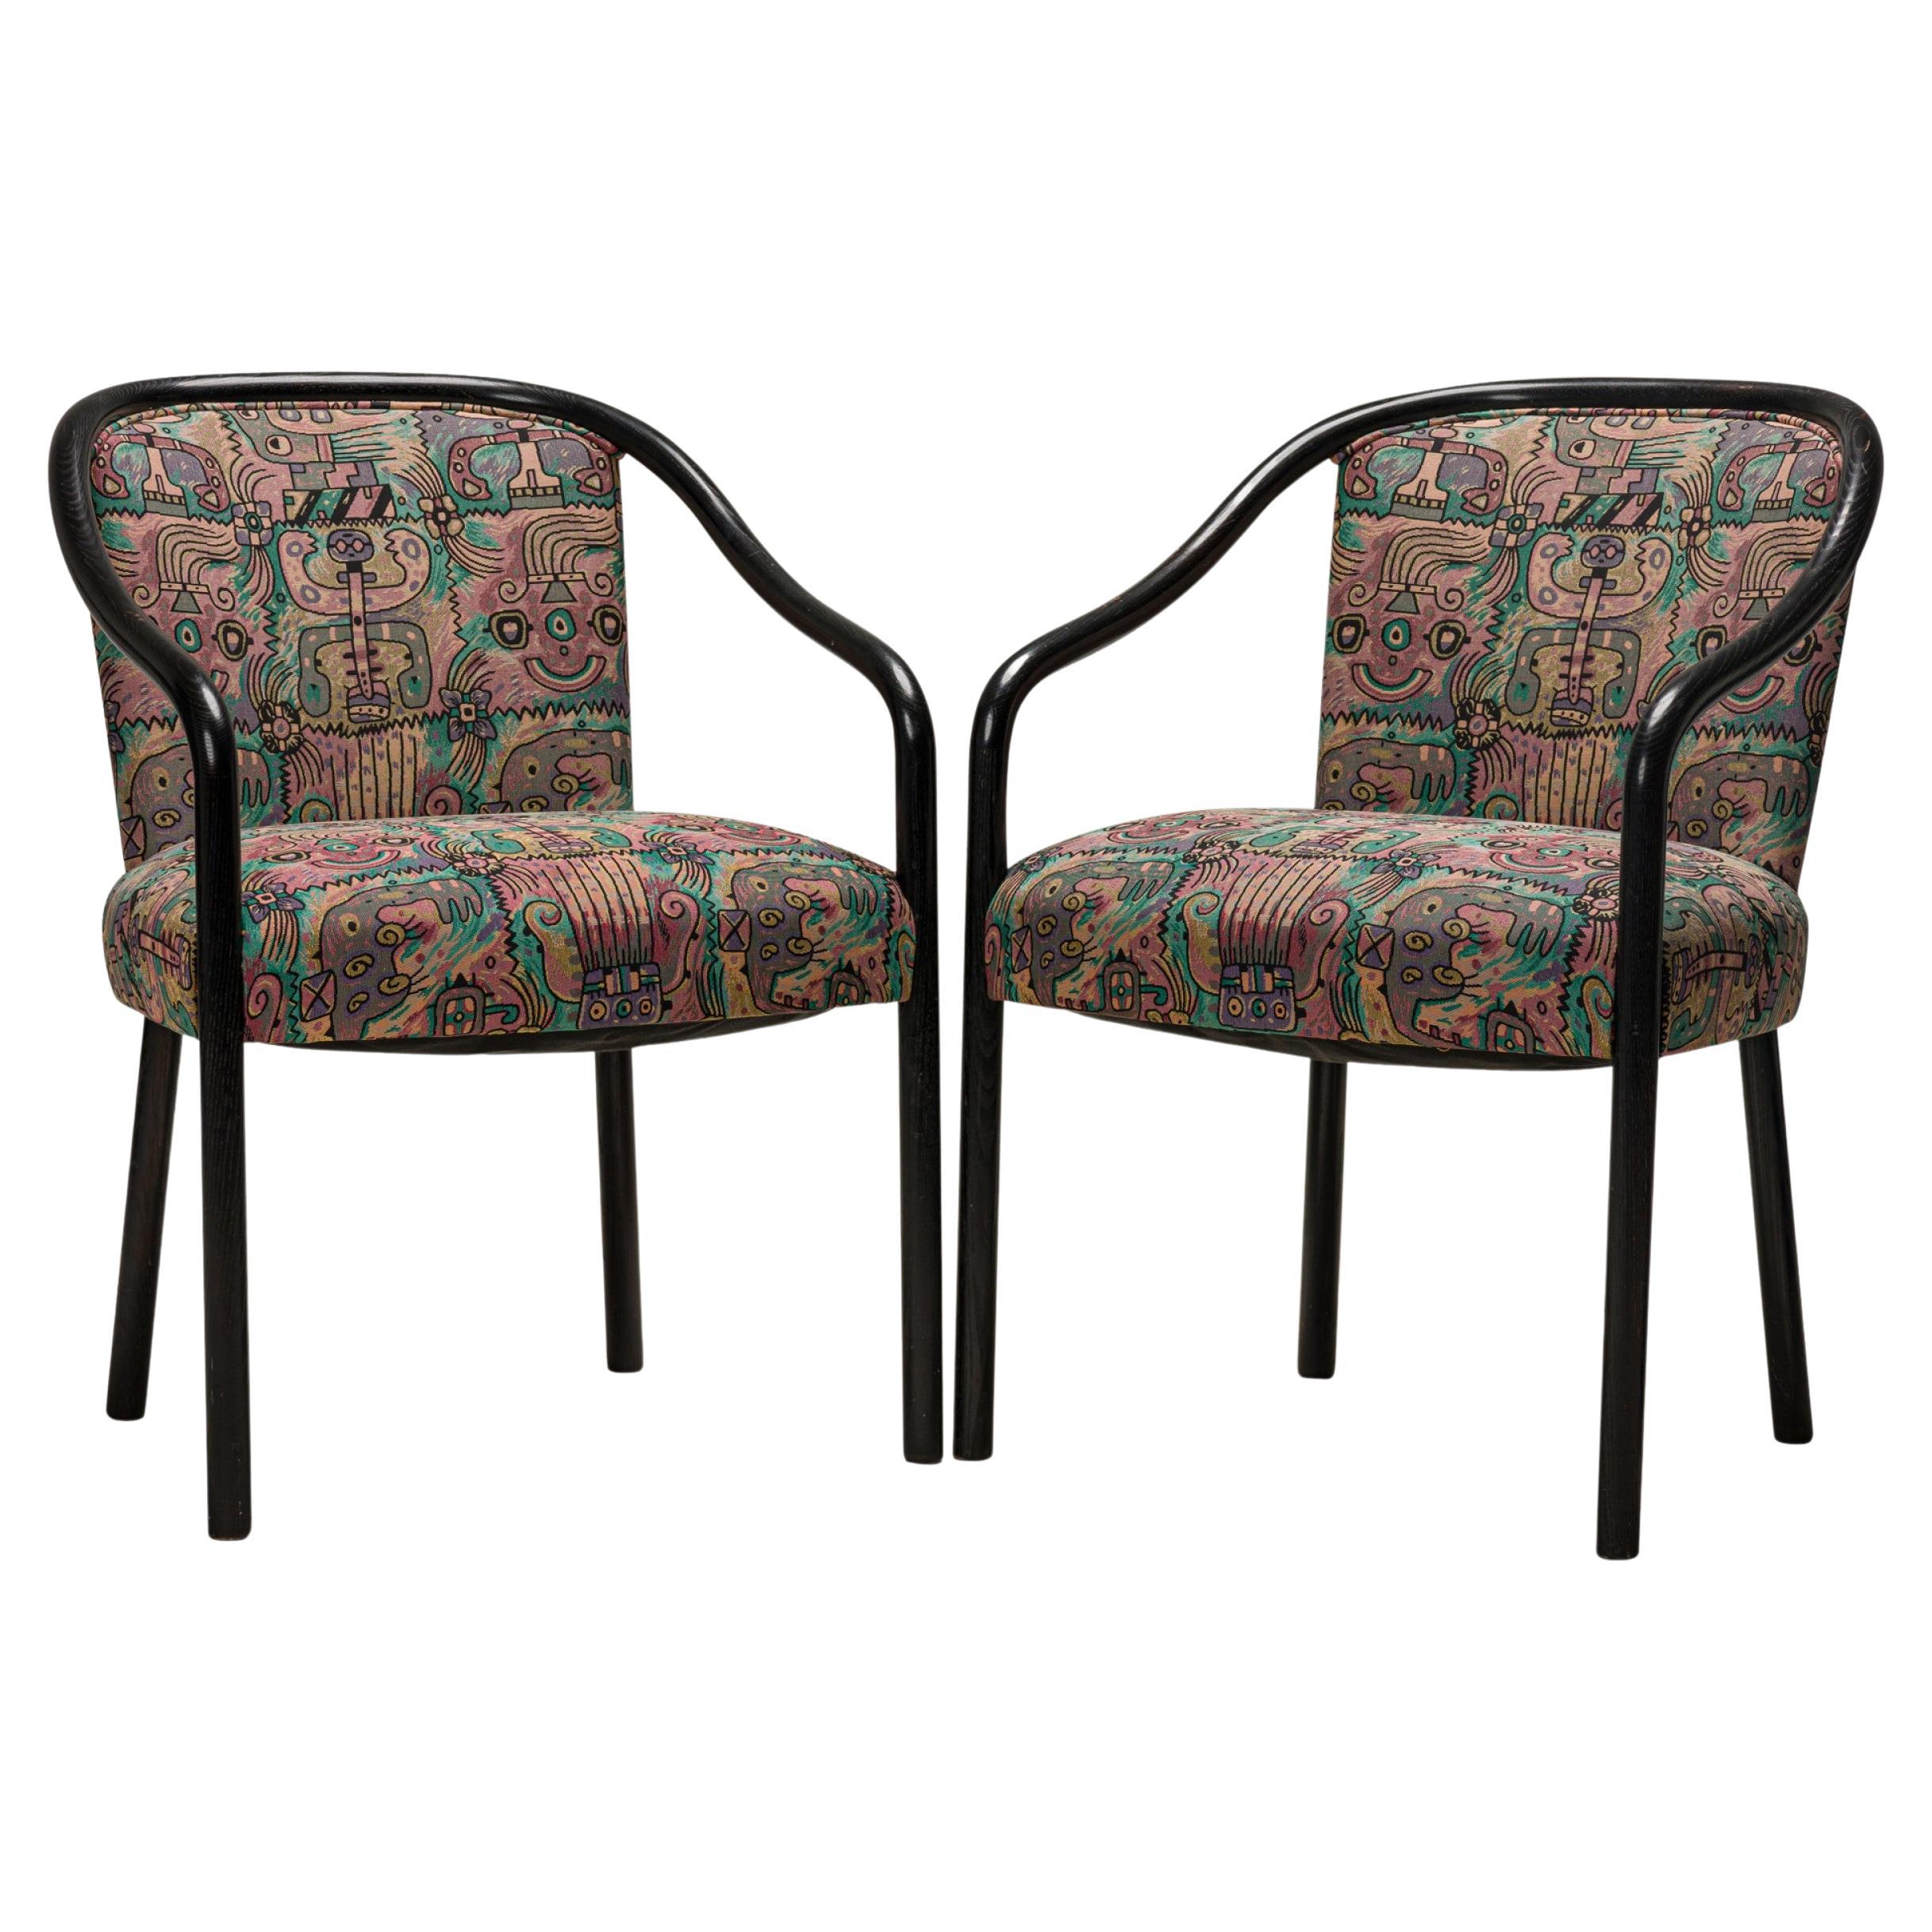 Set of 4 Ward Bennett Multicolor Upholstered Steam Bent Ash Dining Armchairs For Sale